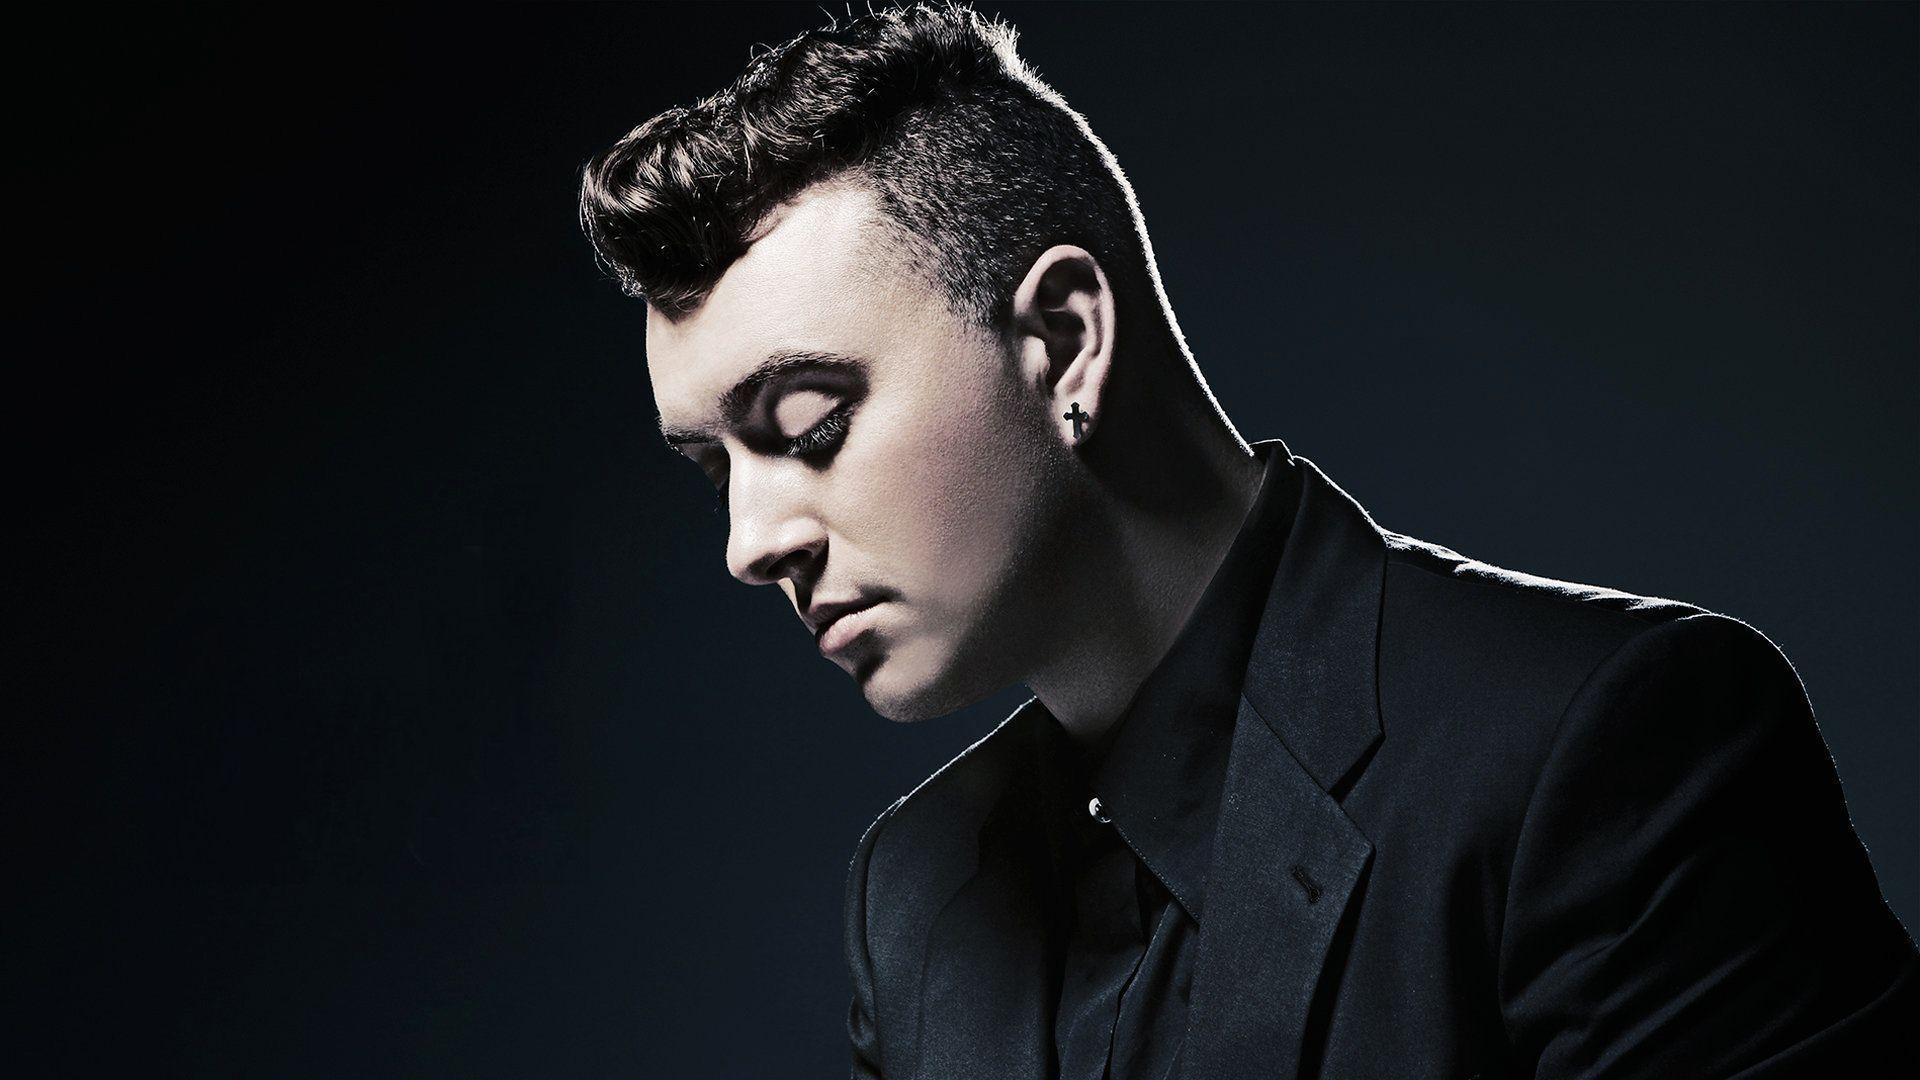 Sam Smith Wallpaper High Resolution and Quality Download